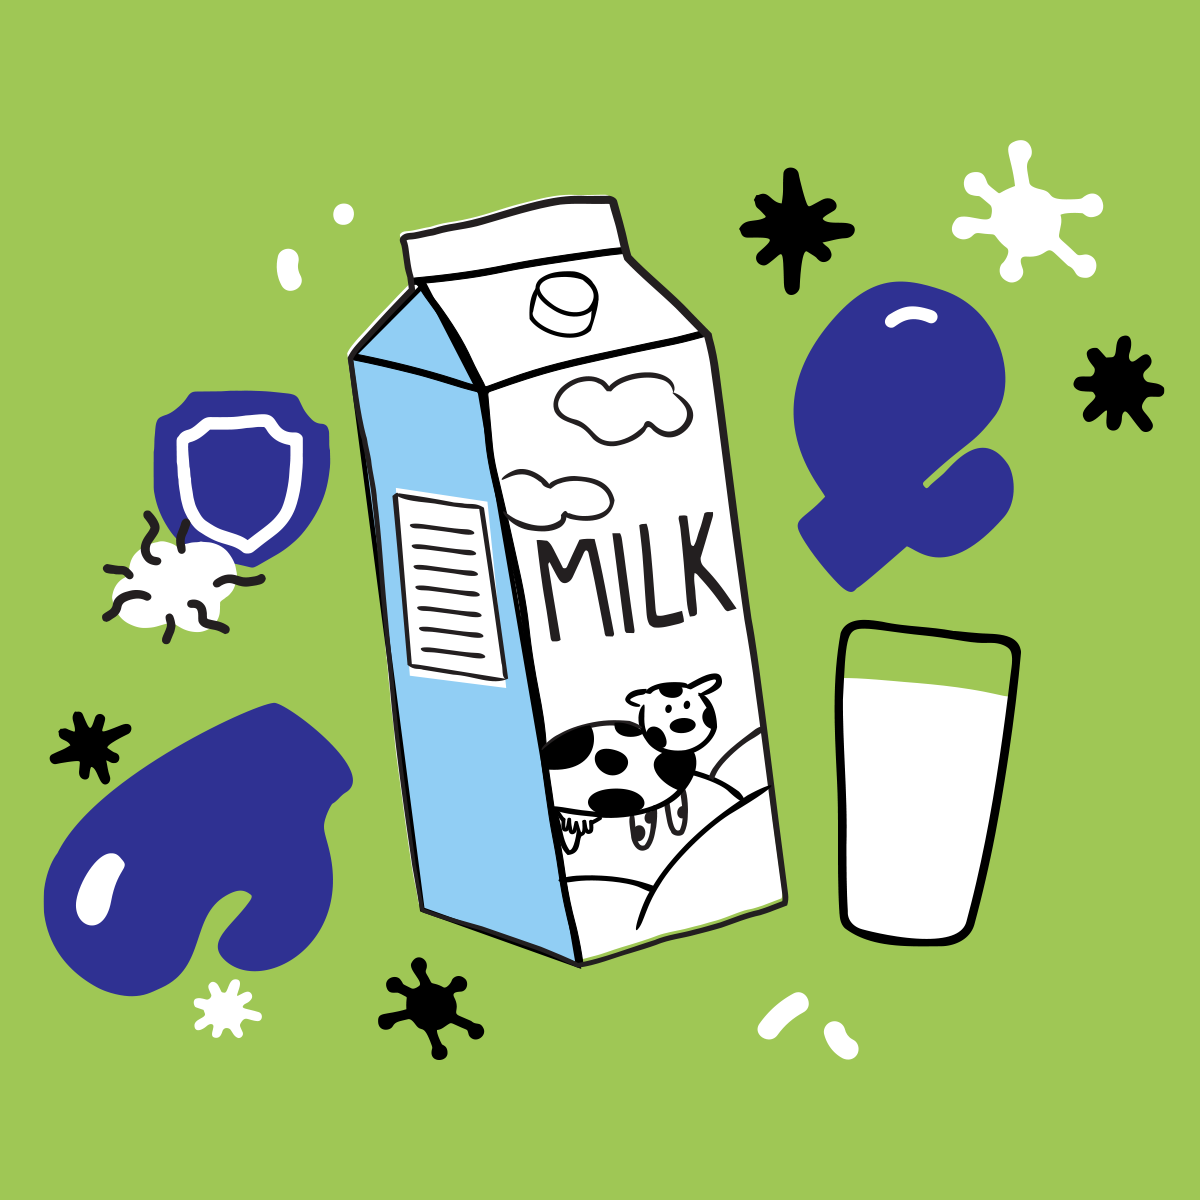 Milk Can Help Boost Your Immune System